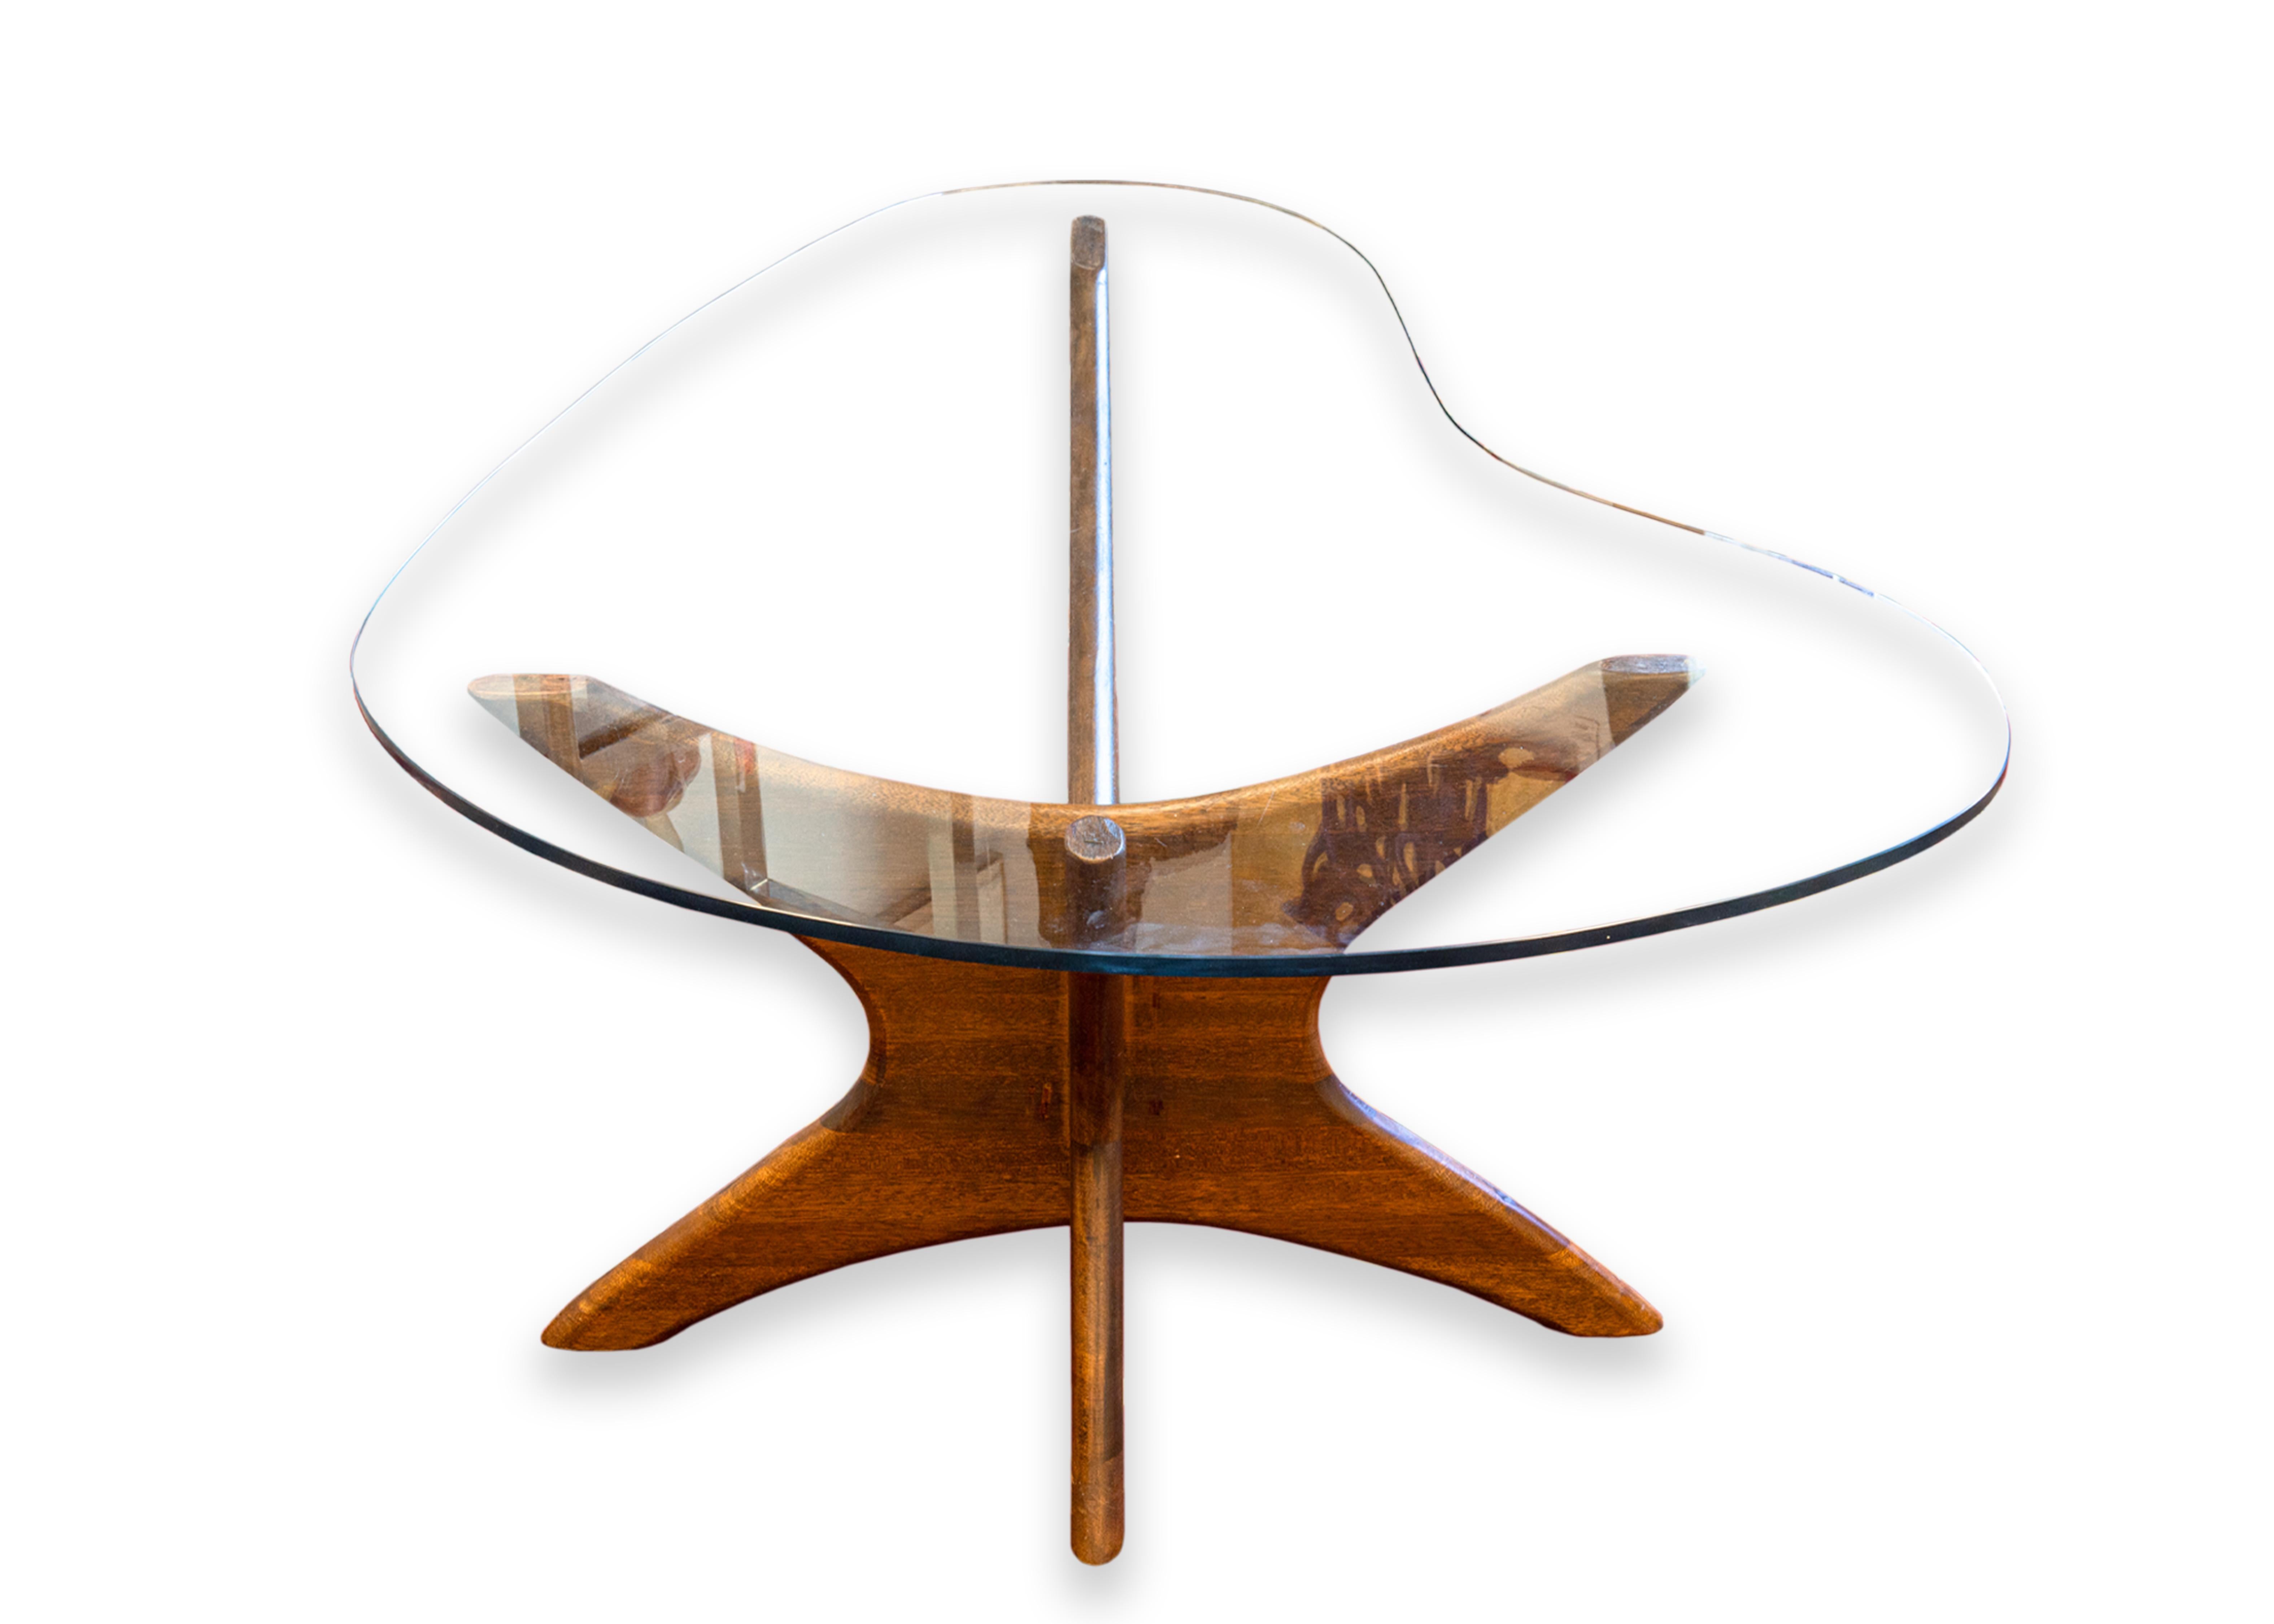 An Adrian Pearsall Jacks coffee table for Craft Associates. A gorgeous mid century modern classic piece of furniture. This piece features a lovely walnut wood frame, and a free form kidney shaped glass table top. This piece is in very good